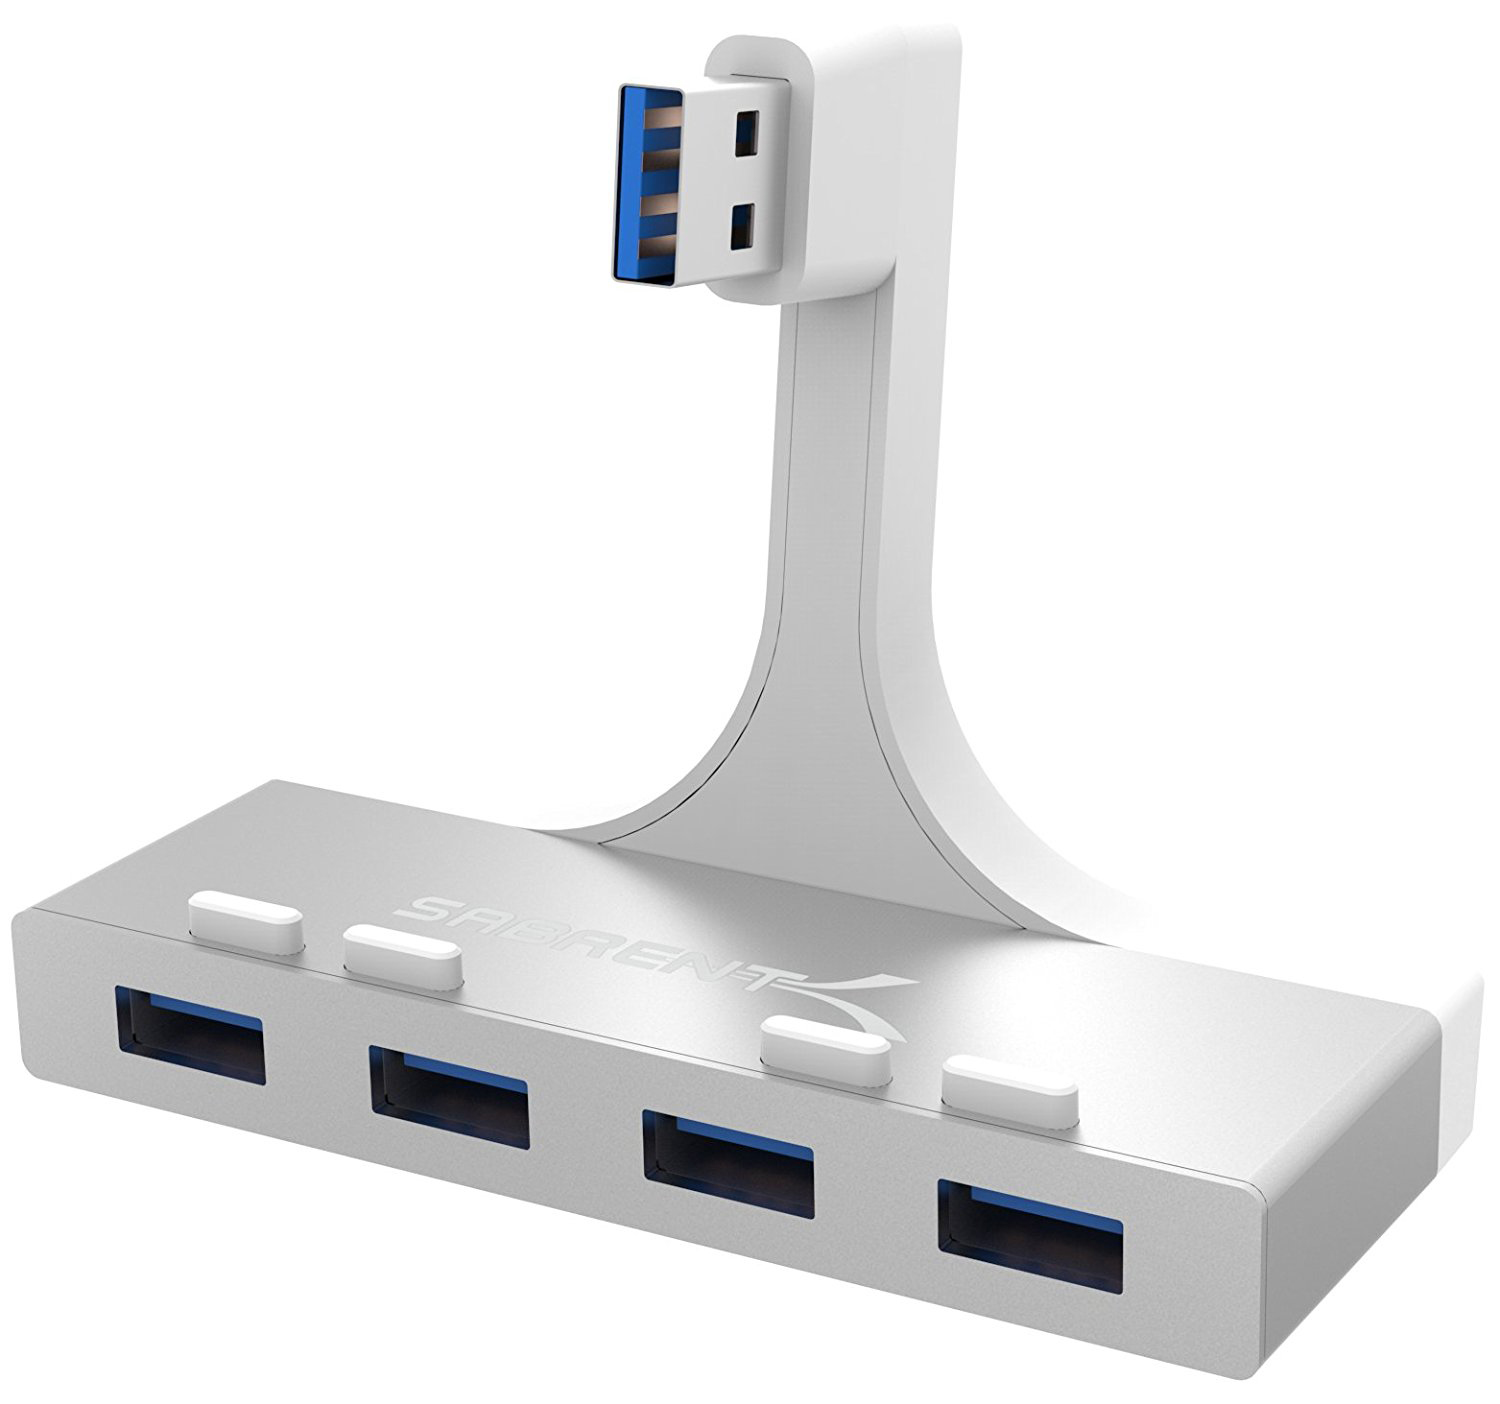 Best USB Hubs for Your Mac | iMore